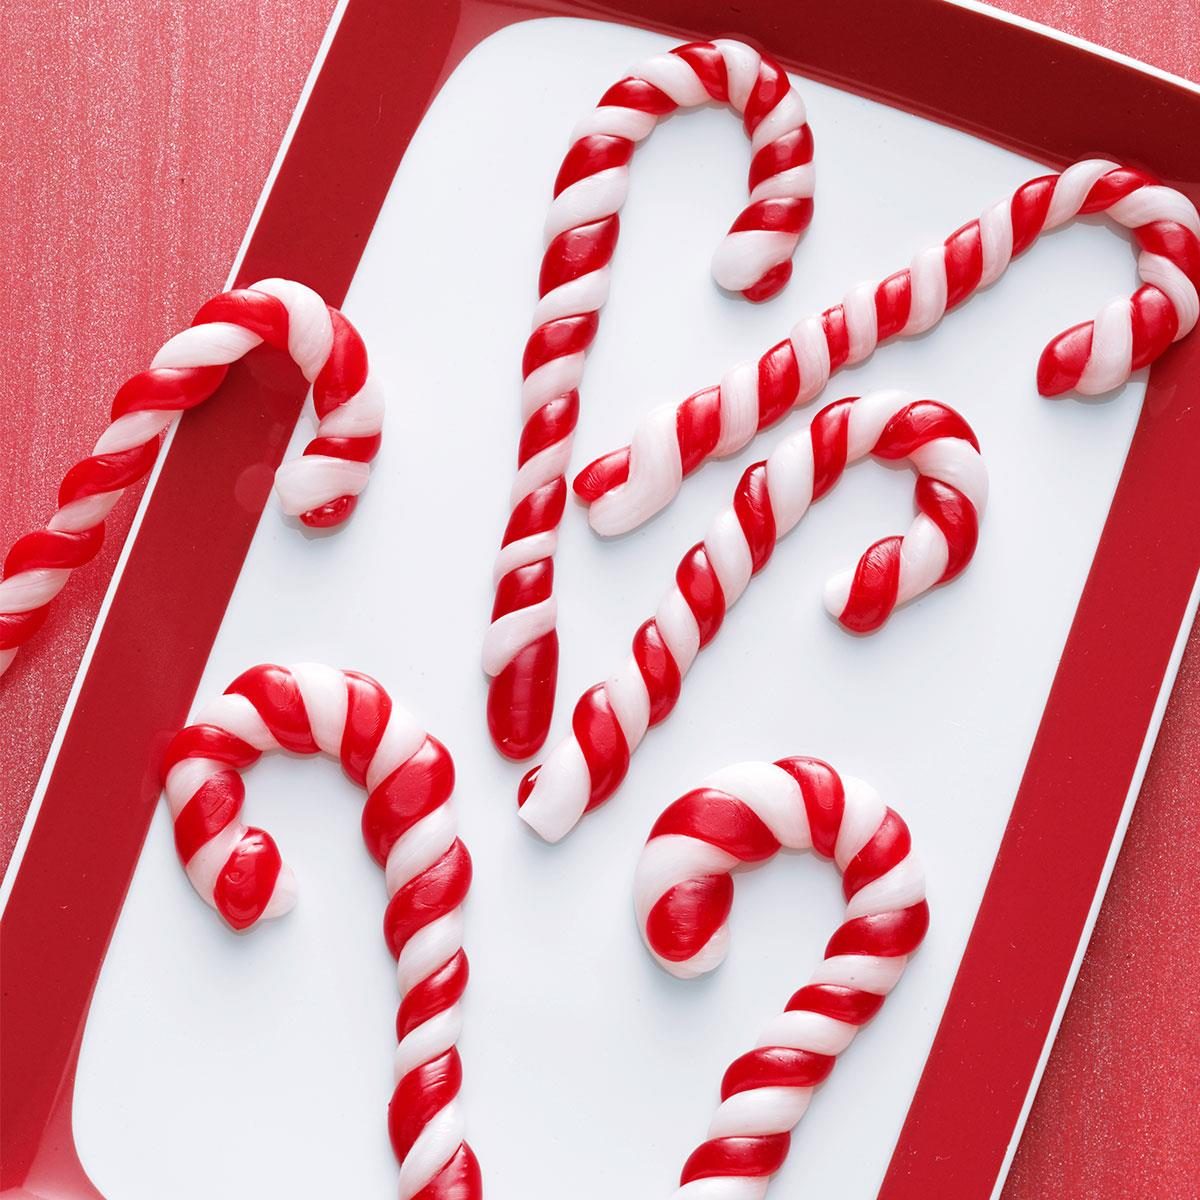 Christmas Candy Gifts for Neighbors - Sweet Candy Company